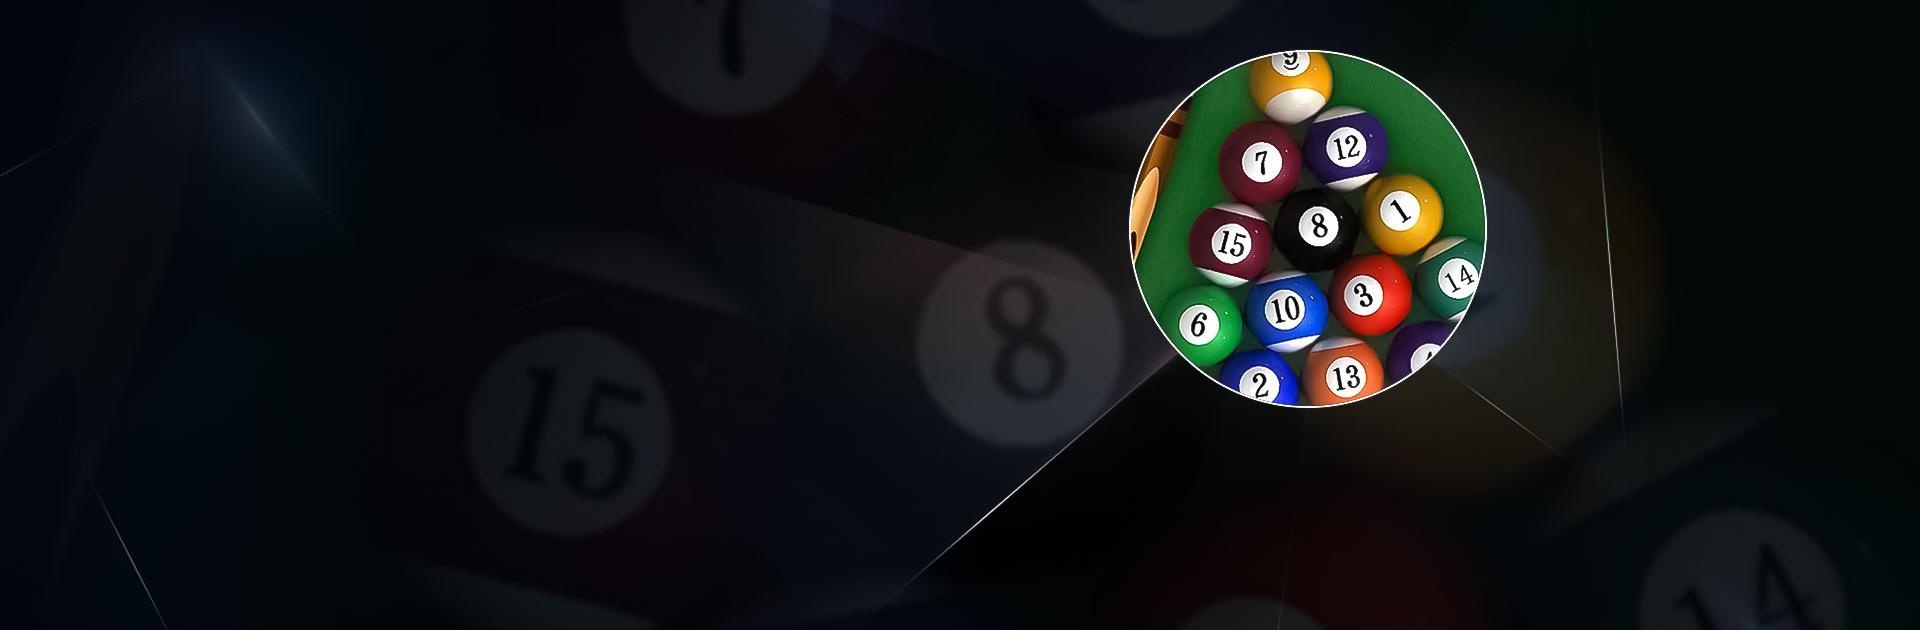 Play 8 Ball Live - Billiards Games Online